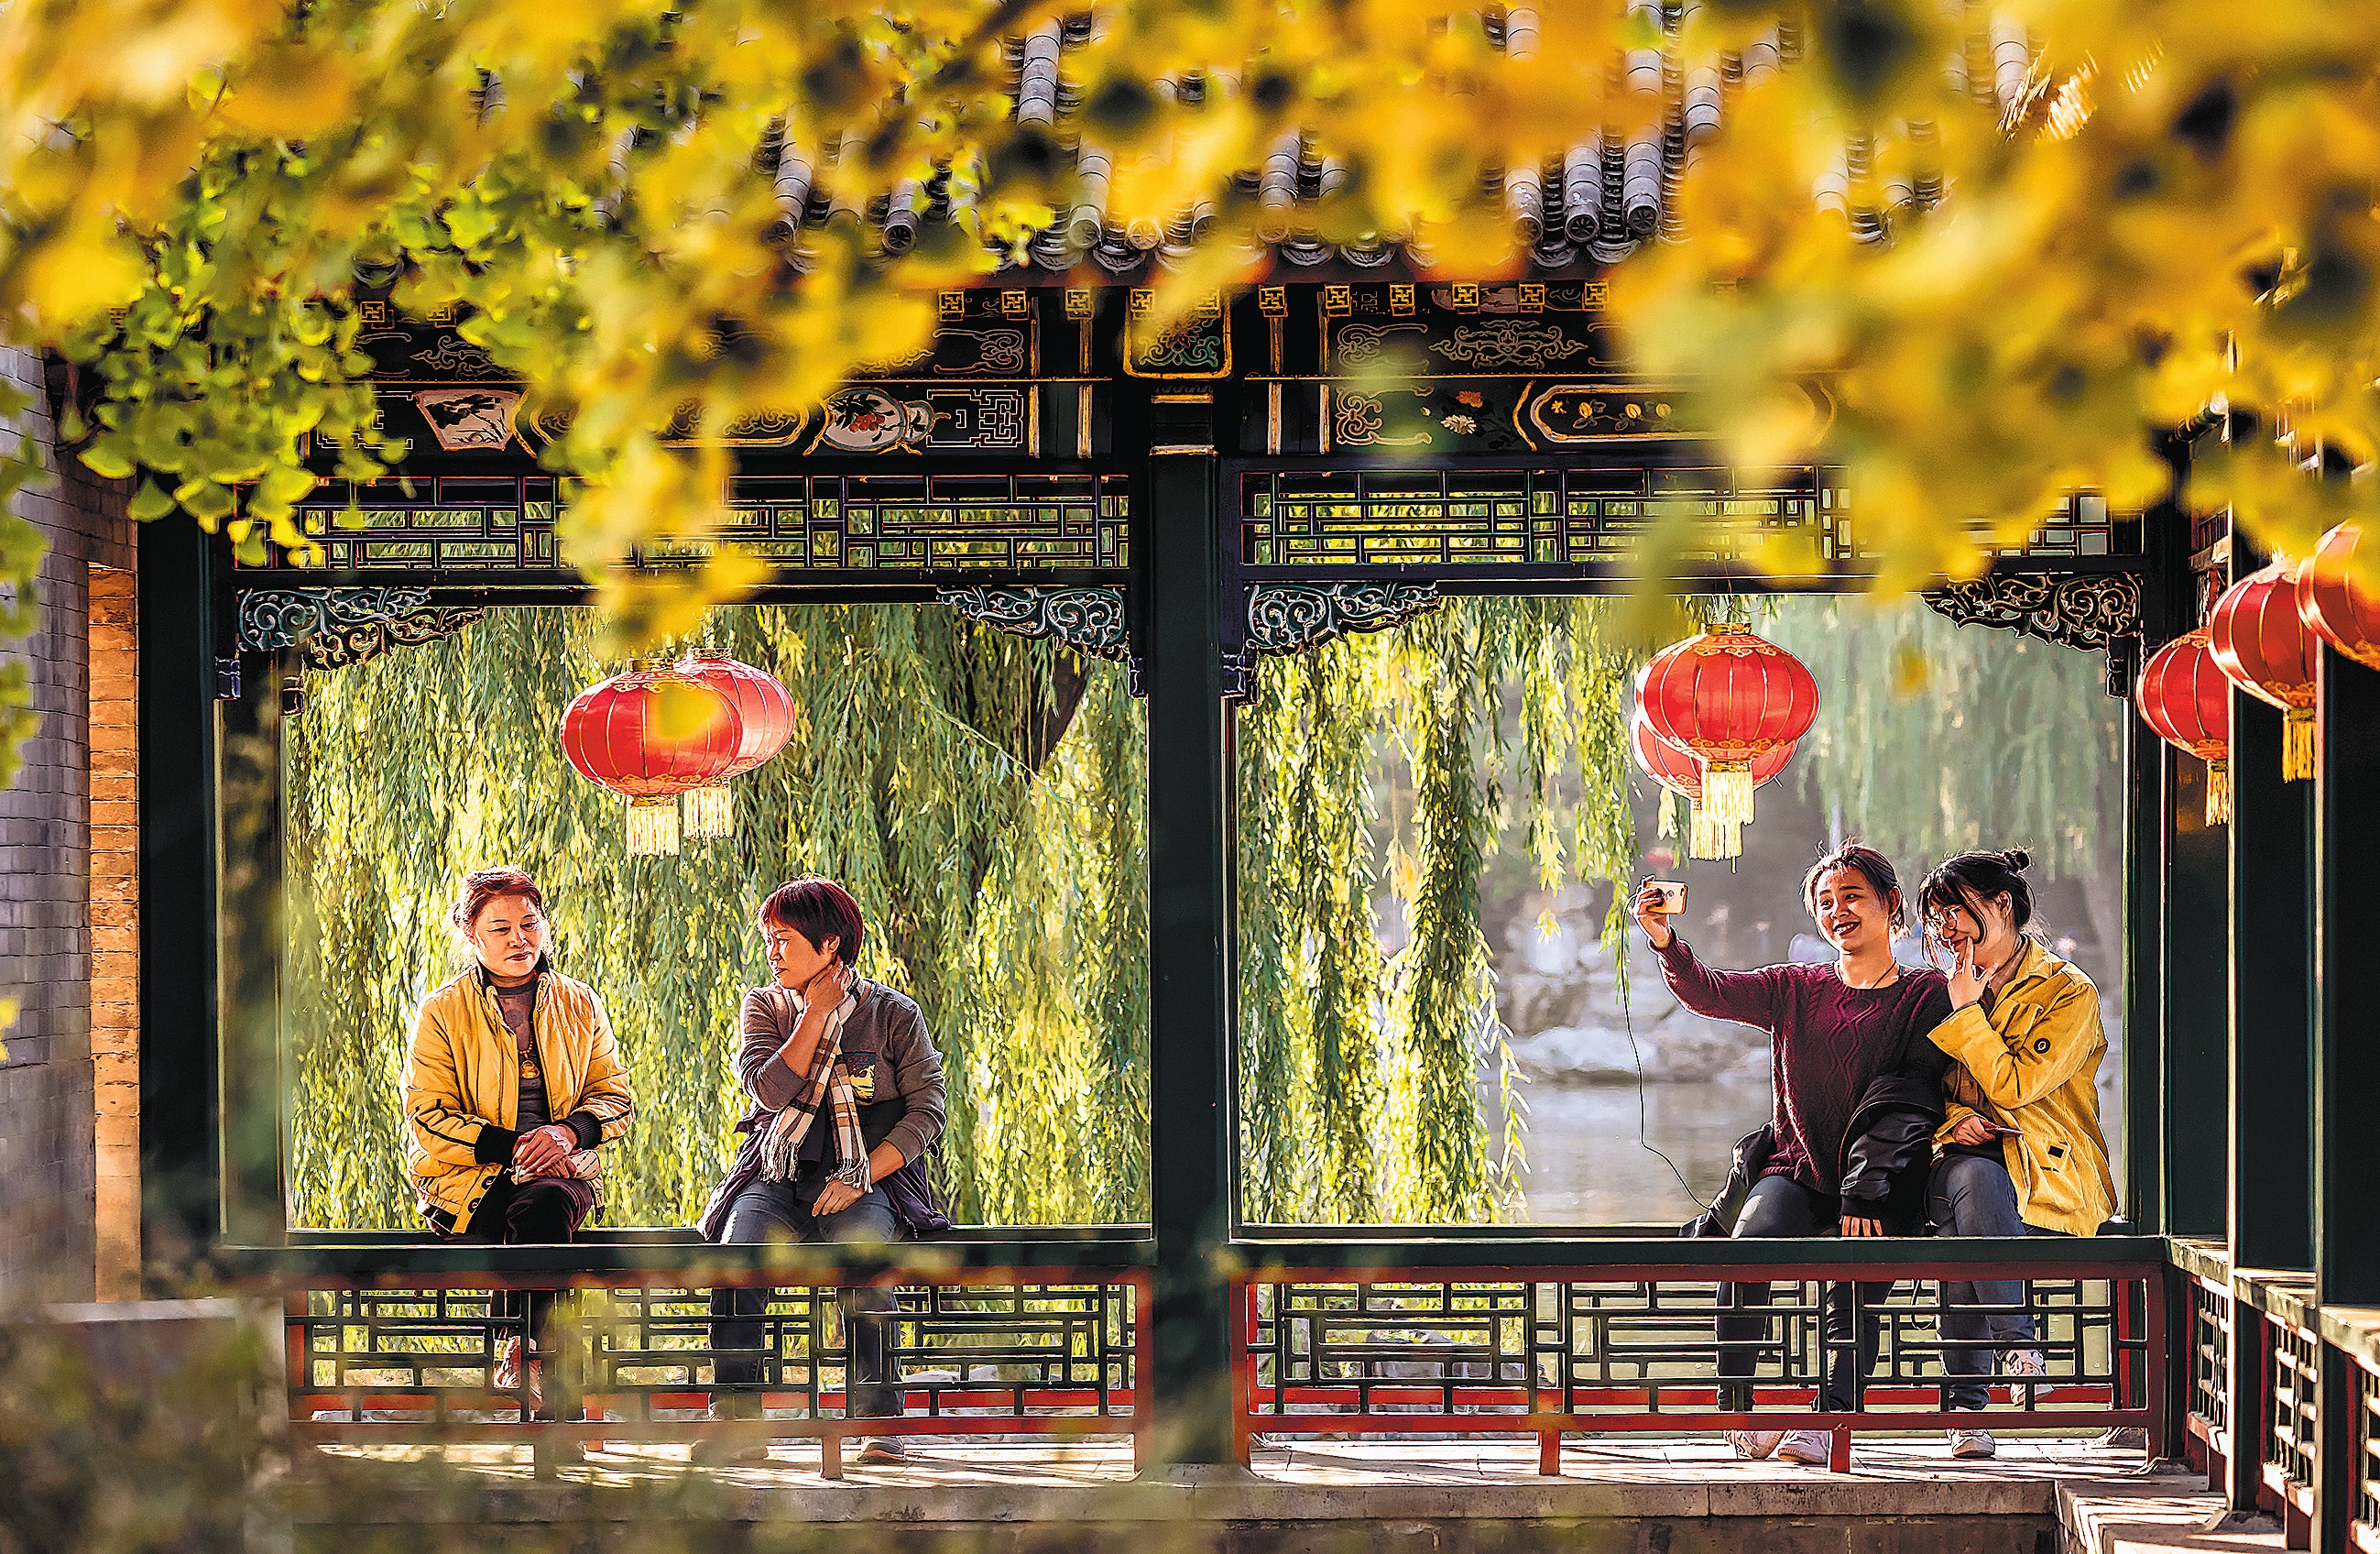 Residents enjoy their spare time in a small garden beside a hutong